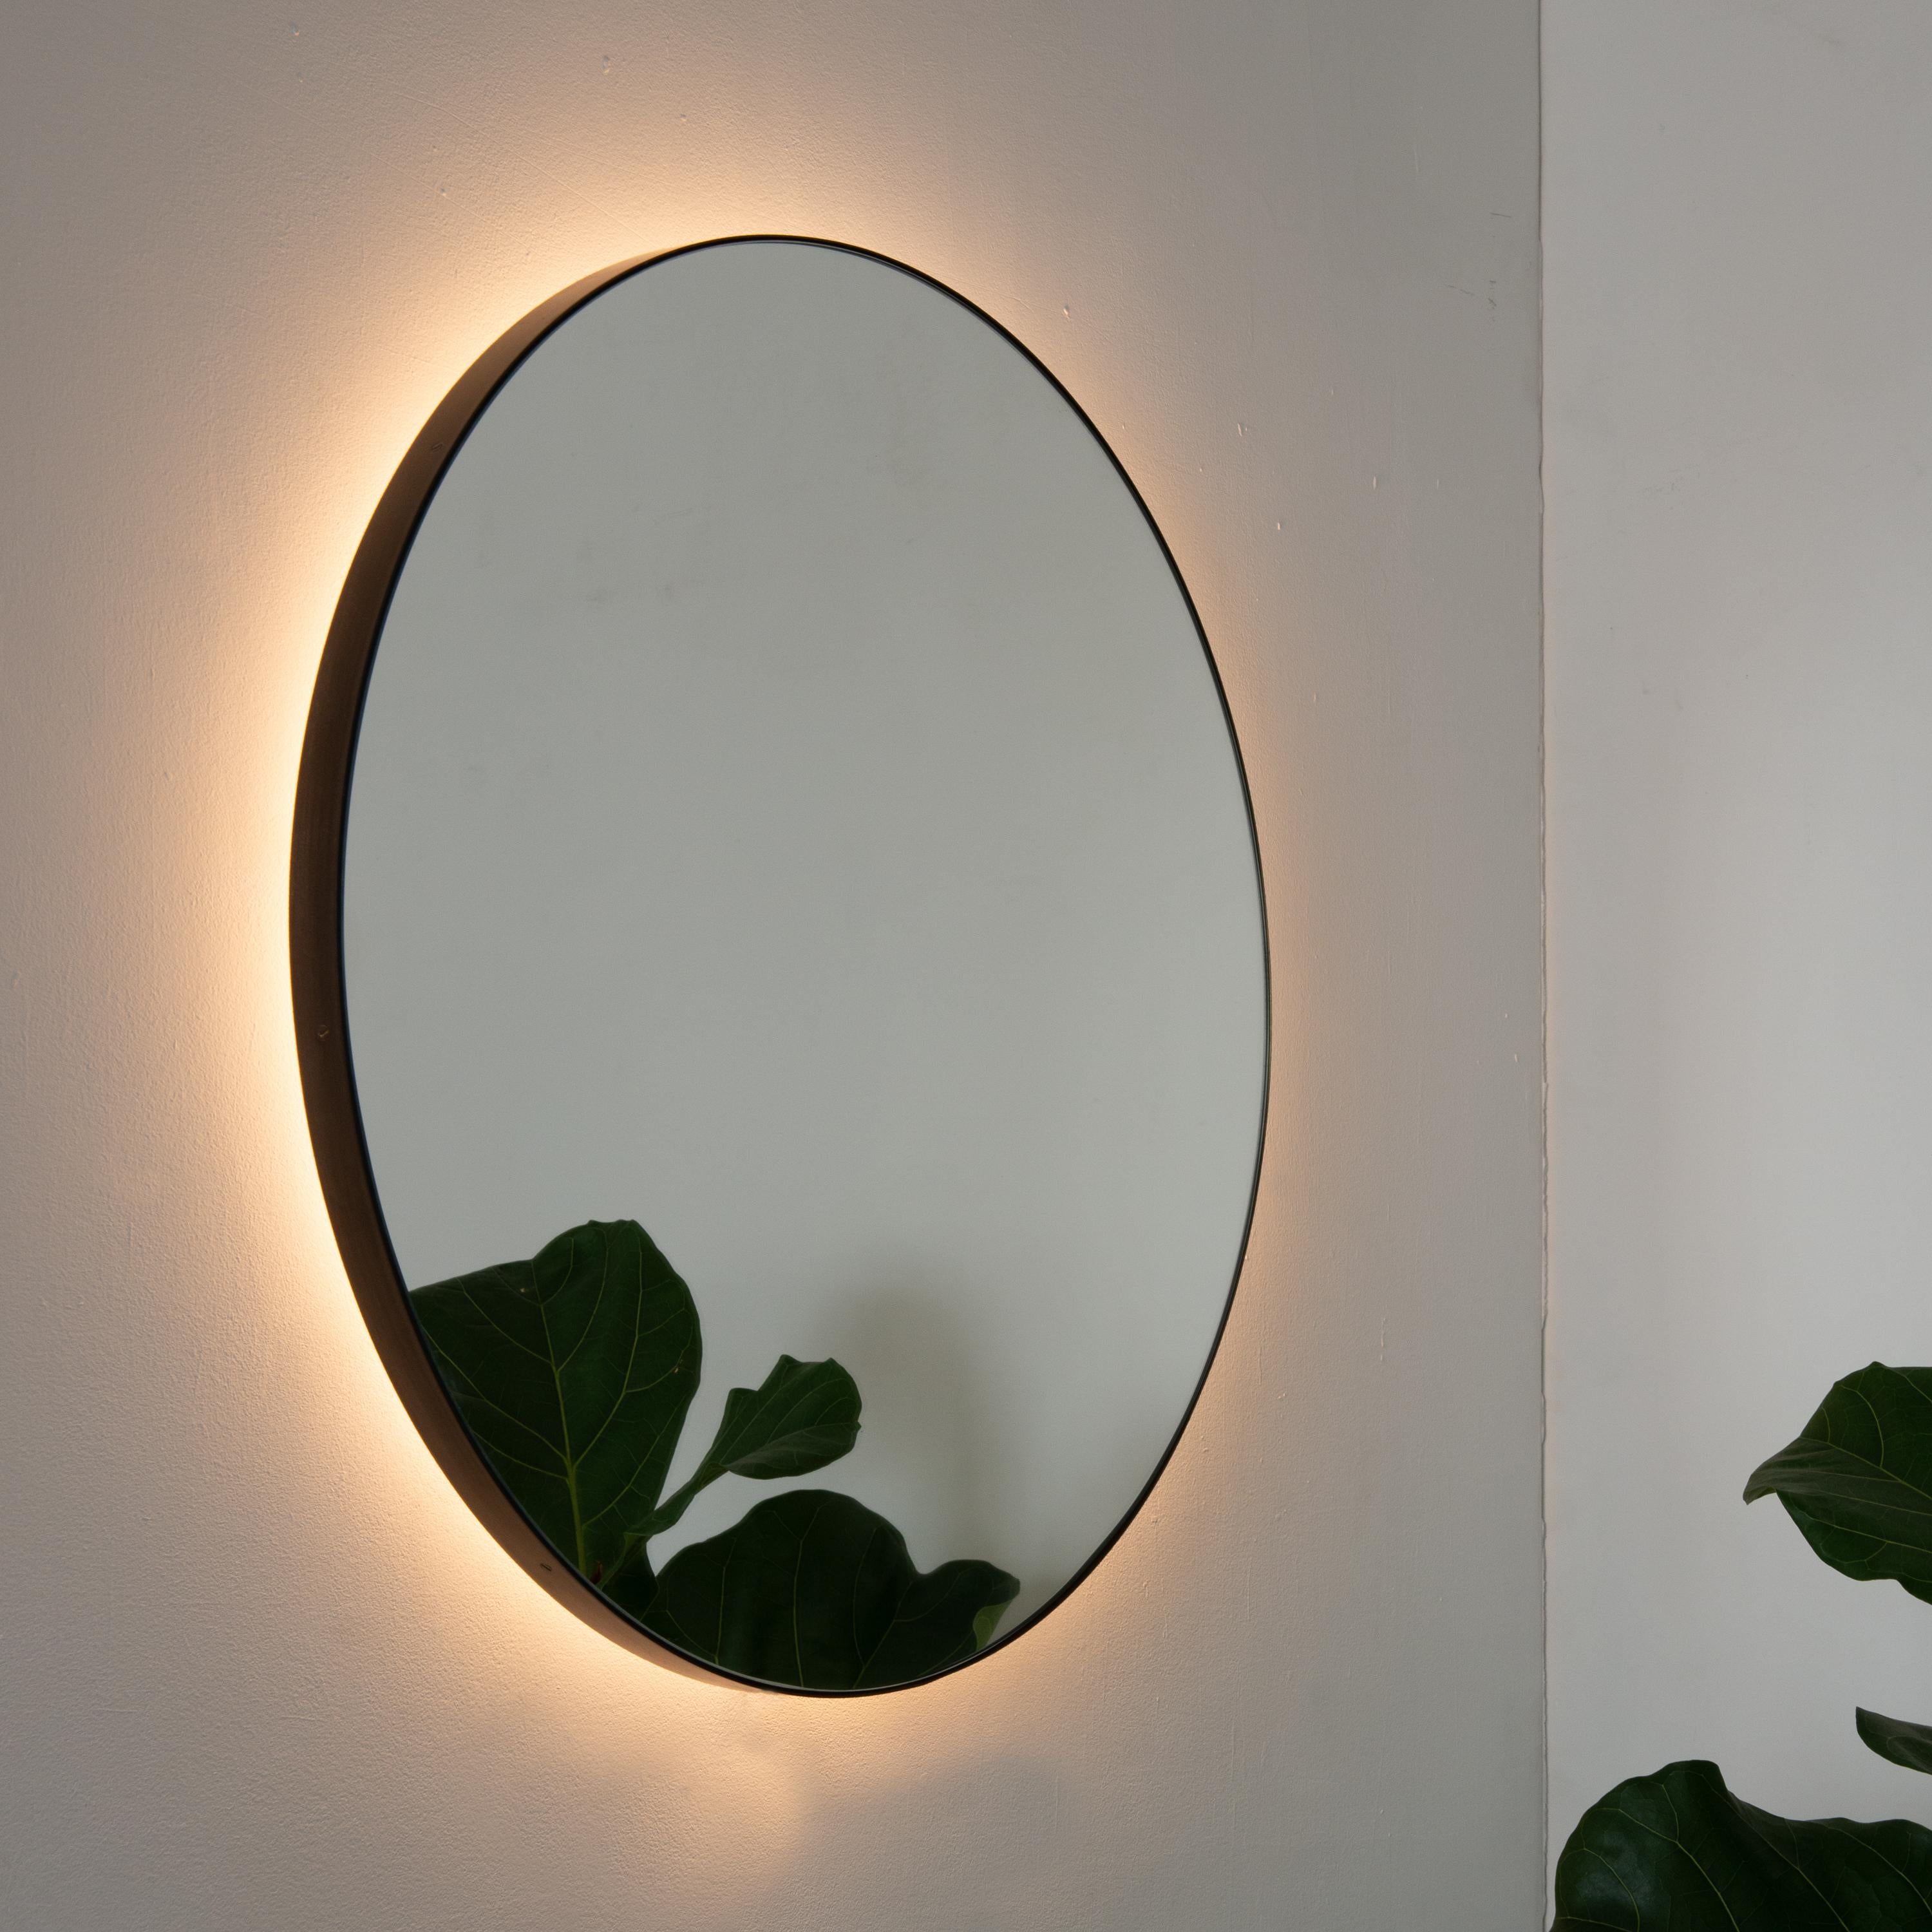 This item is available now at a special 20% discount. It may be packed and shipped within 3 days of receiving an order.

Minimalist round mirror with an elegant bronze patina brass frame and back illumination. Designed and handcrafted in London,